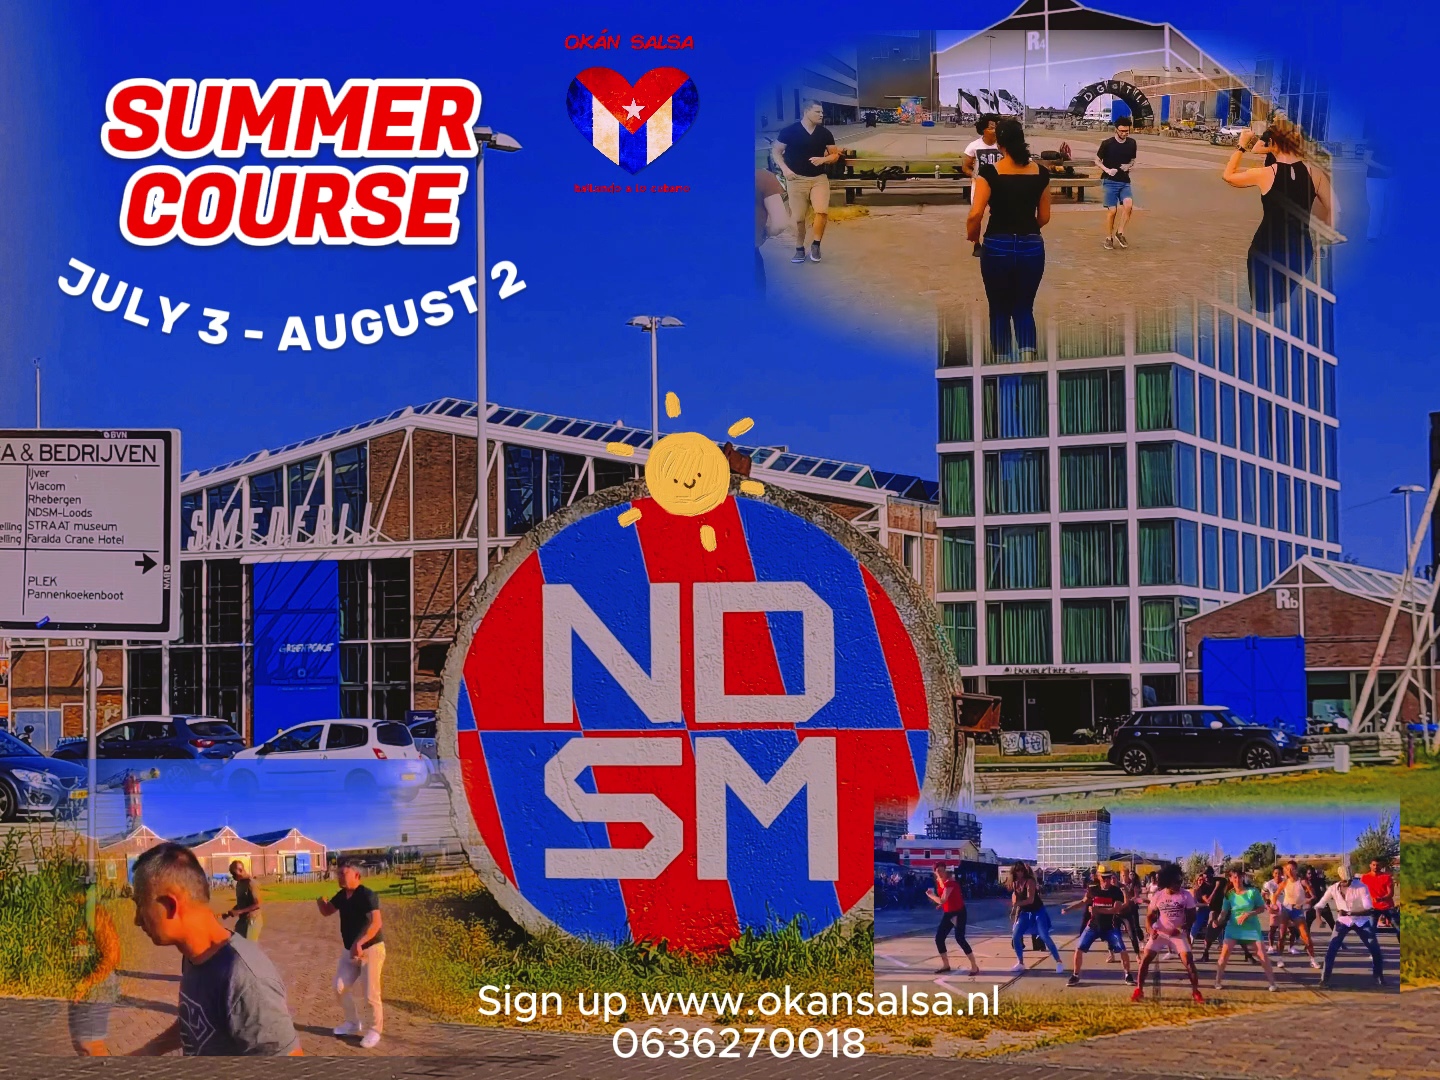 Summer courses at NDSM